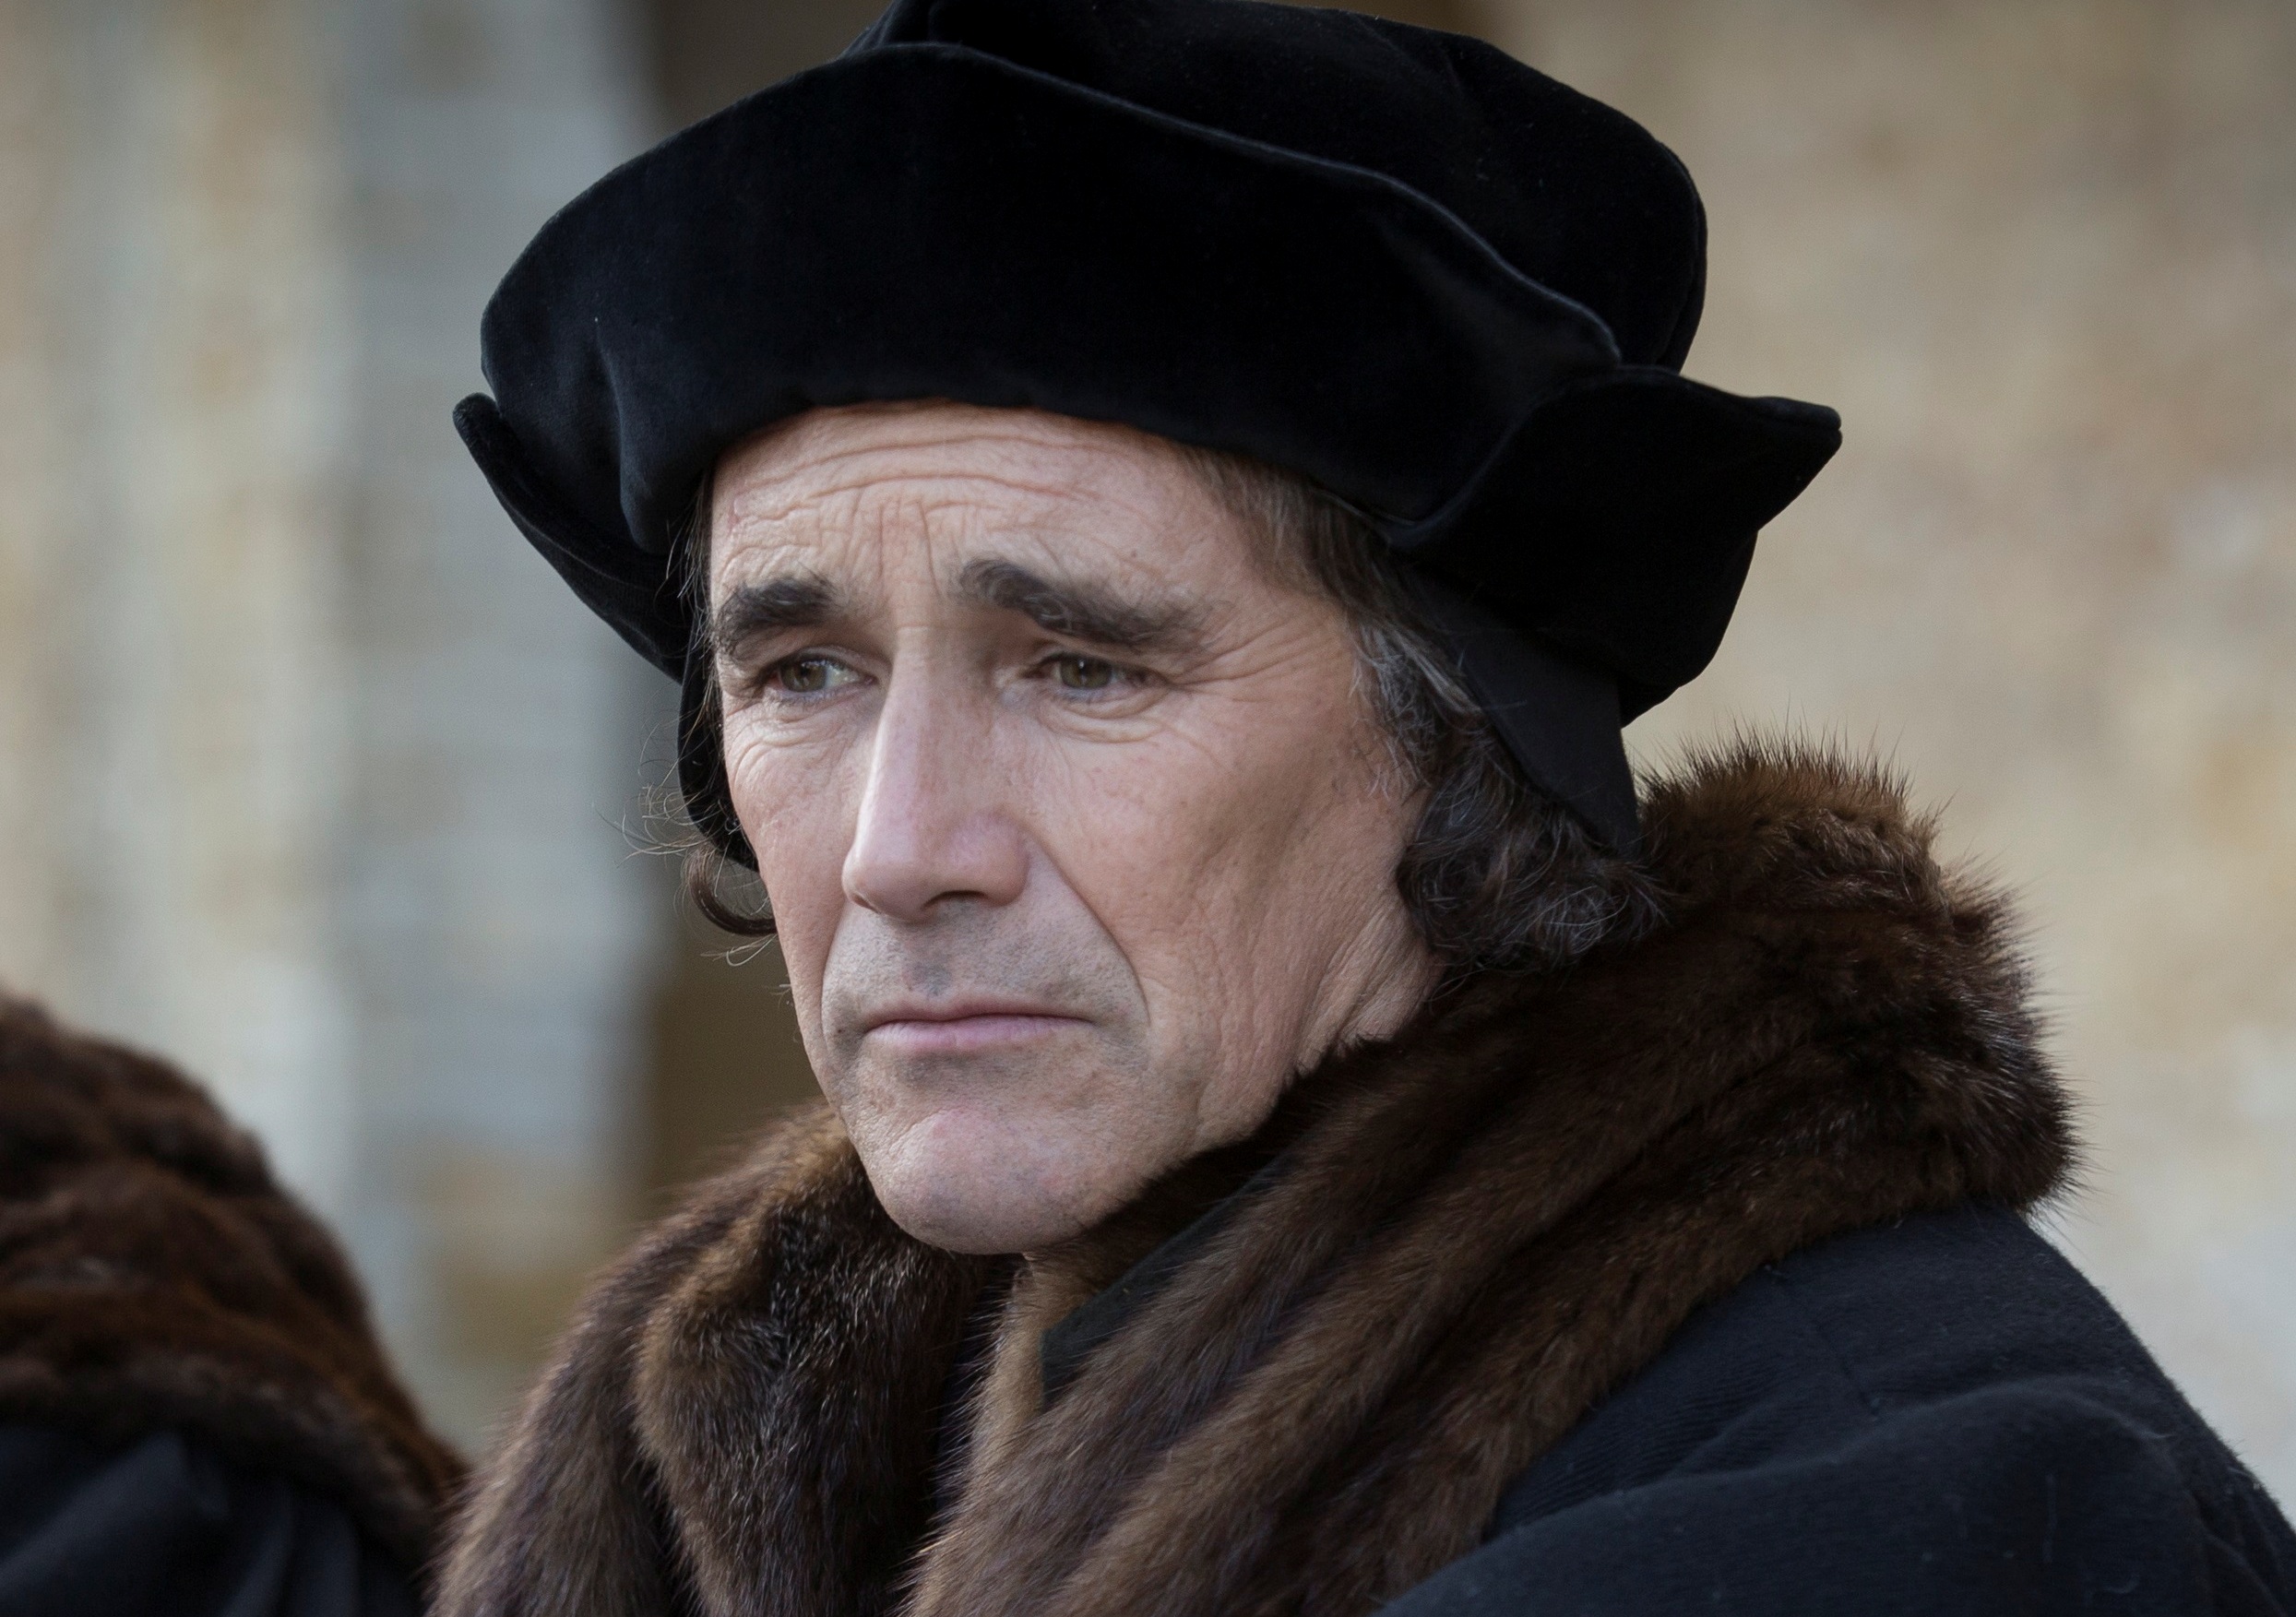 Mark Rylance as Thomas Cromwell. (Photo: Courtesy of Ed Miller/Playground and Company Pictures for Masterpiece/BBC)